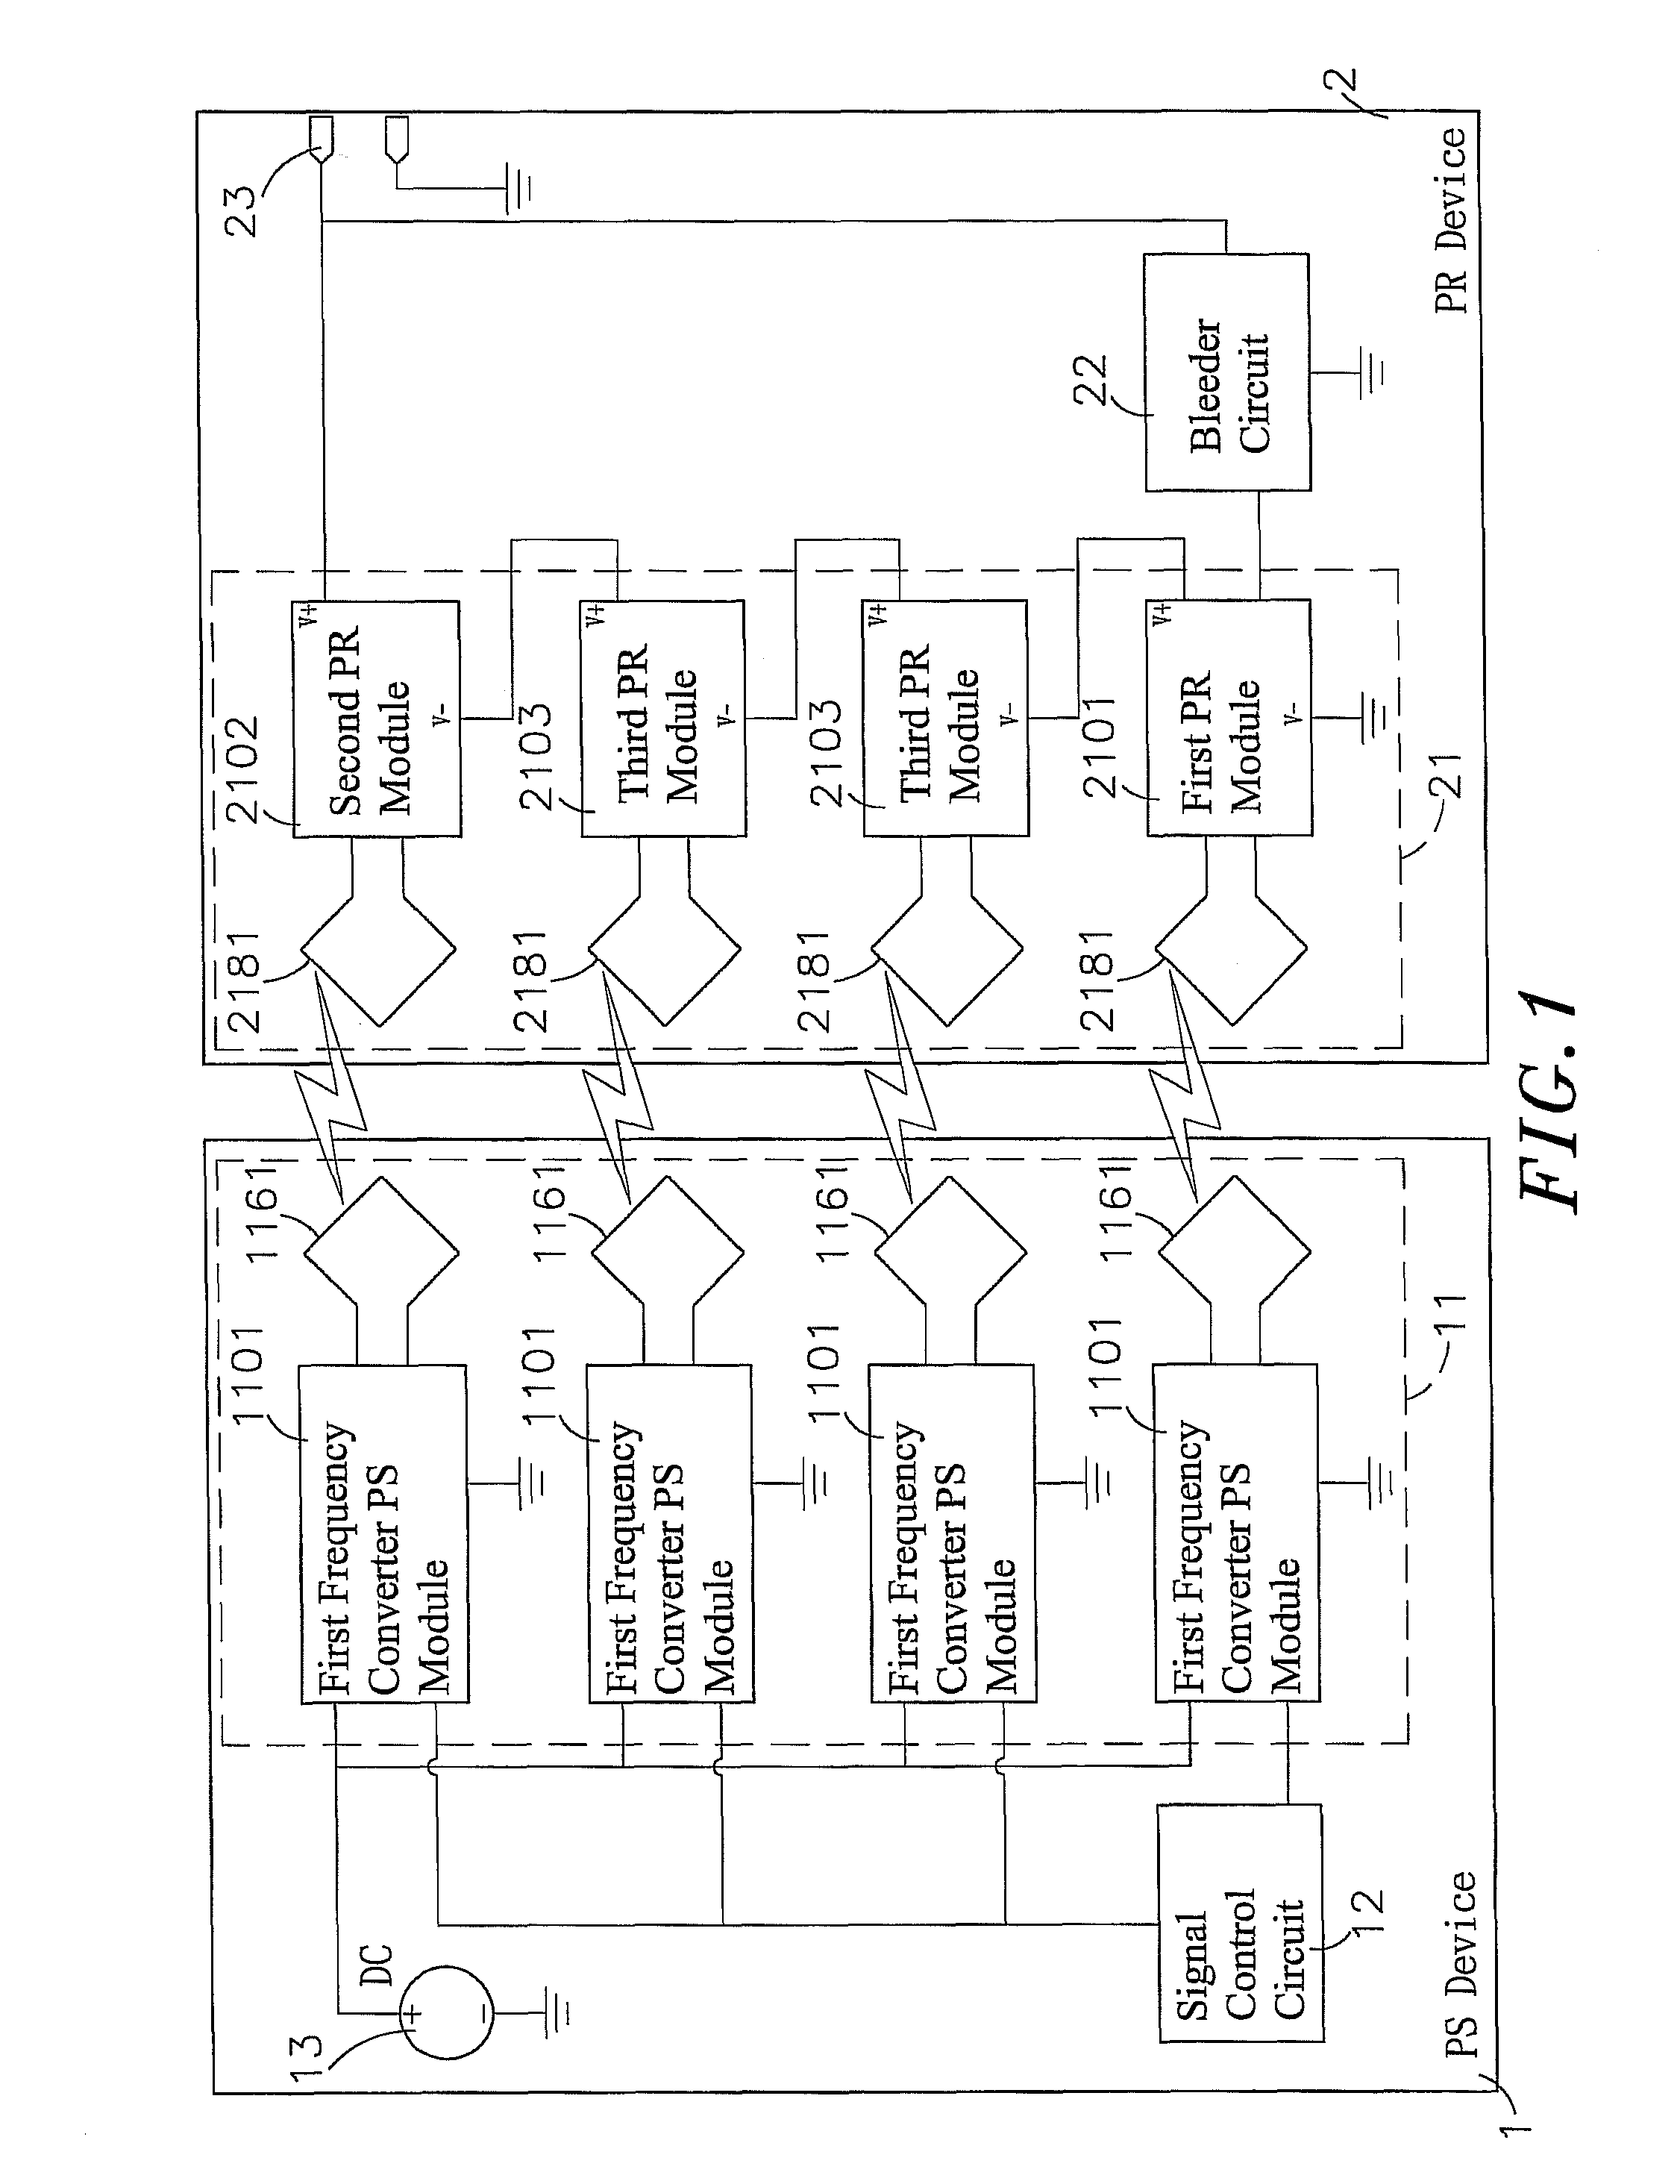 Inductive charging method for vehicles